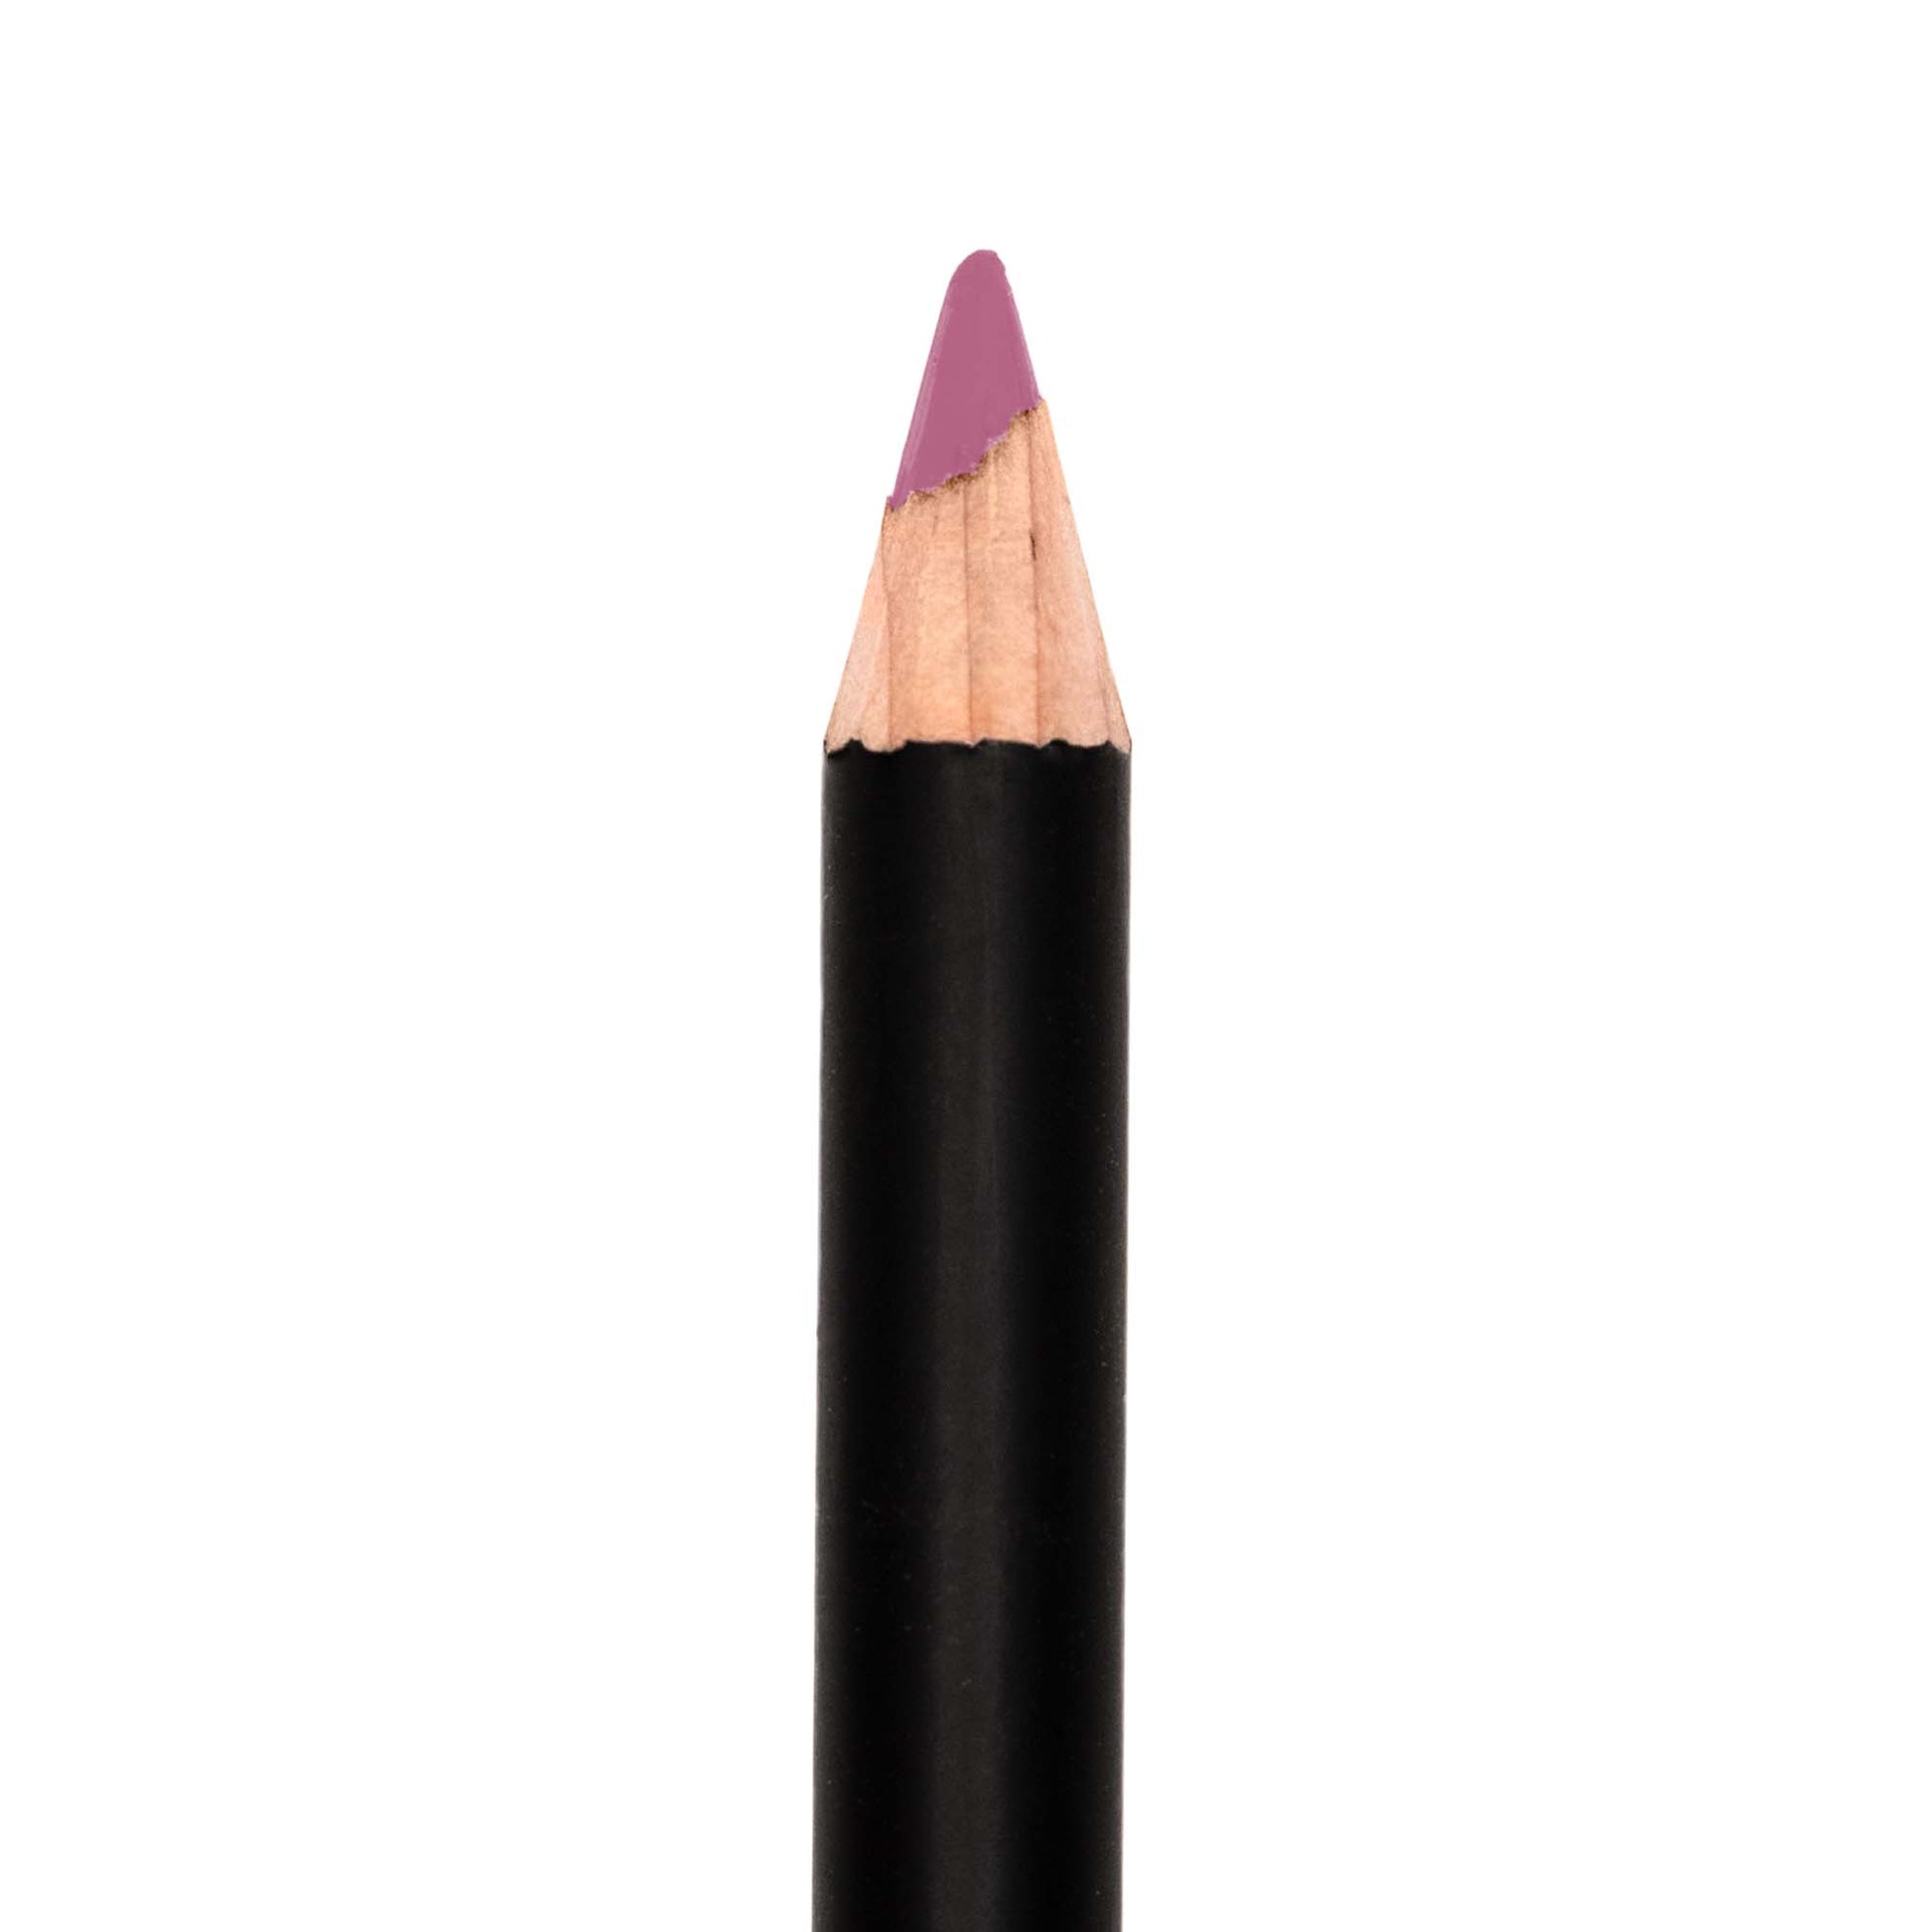 Intensify your look with Cruisin Organics Bare Lip Pencil. The shea butter infused formula provides long-lasting wear and a flawless, creamy base for your favorite lipstick. Achieve a fuller, defined pout effortlessly with this no-smudge pencil.